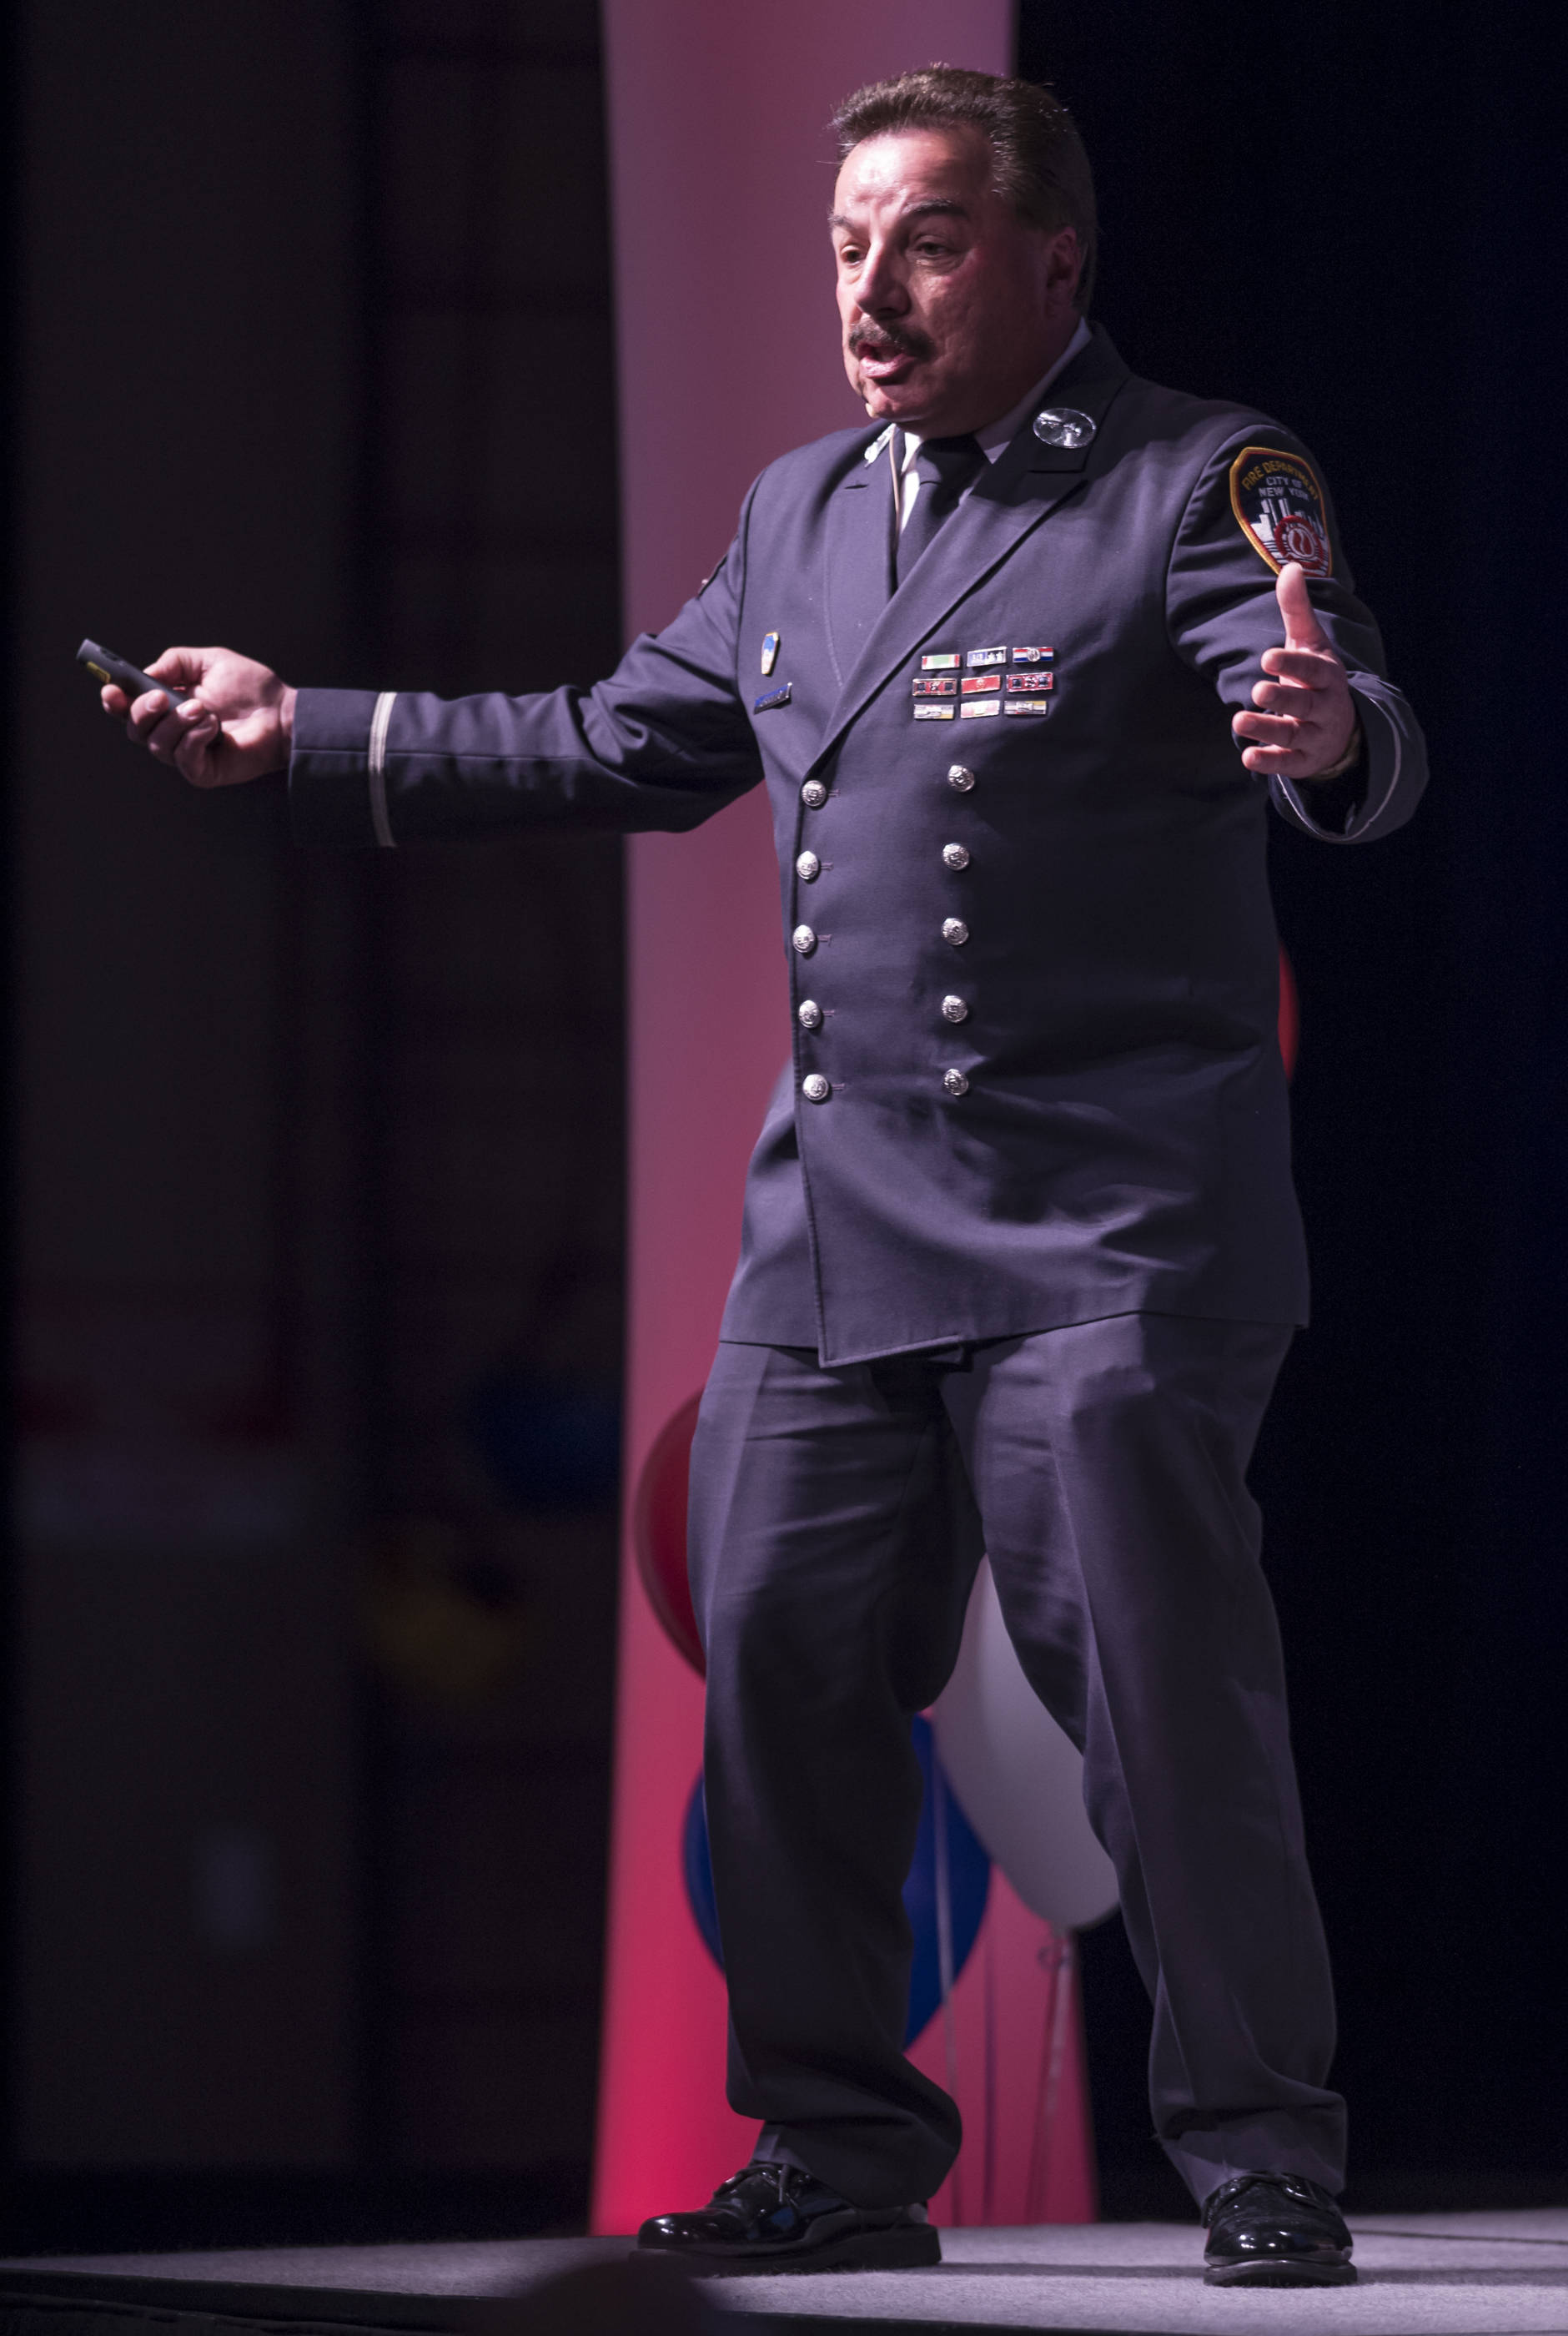 Joe Torrillo, retired from the New York City Fire Department, speaks during the Pillars of America speaker series at Centennial Hall on Wednesday, May 2, 2018. Torrillo tells his story of being buried twice during the collapse of the Twin Tower buildings in the Sept. 11, 2001. (Michael Penn | Juneau Empire)